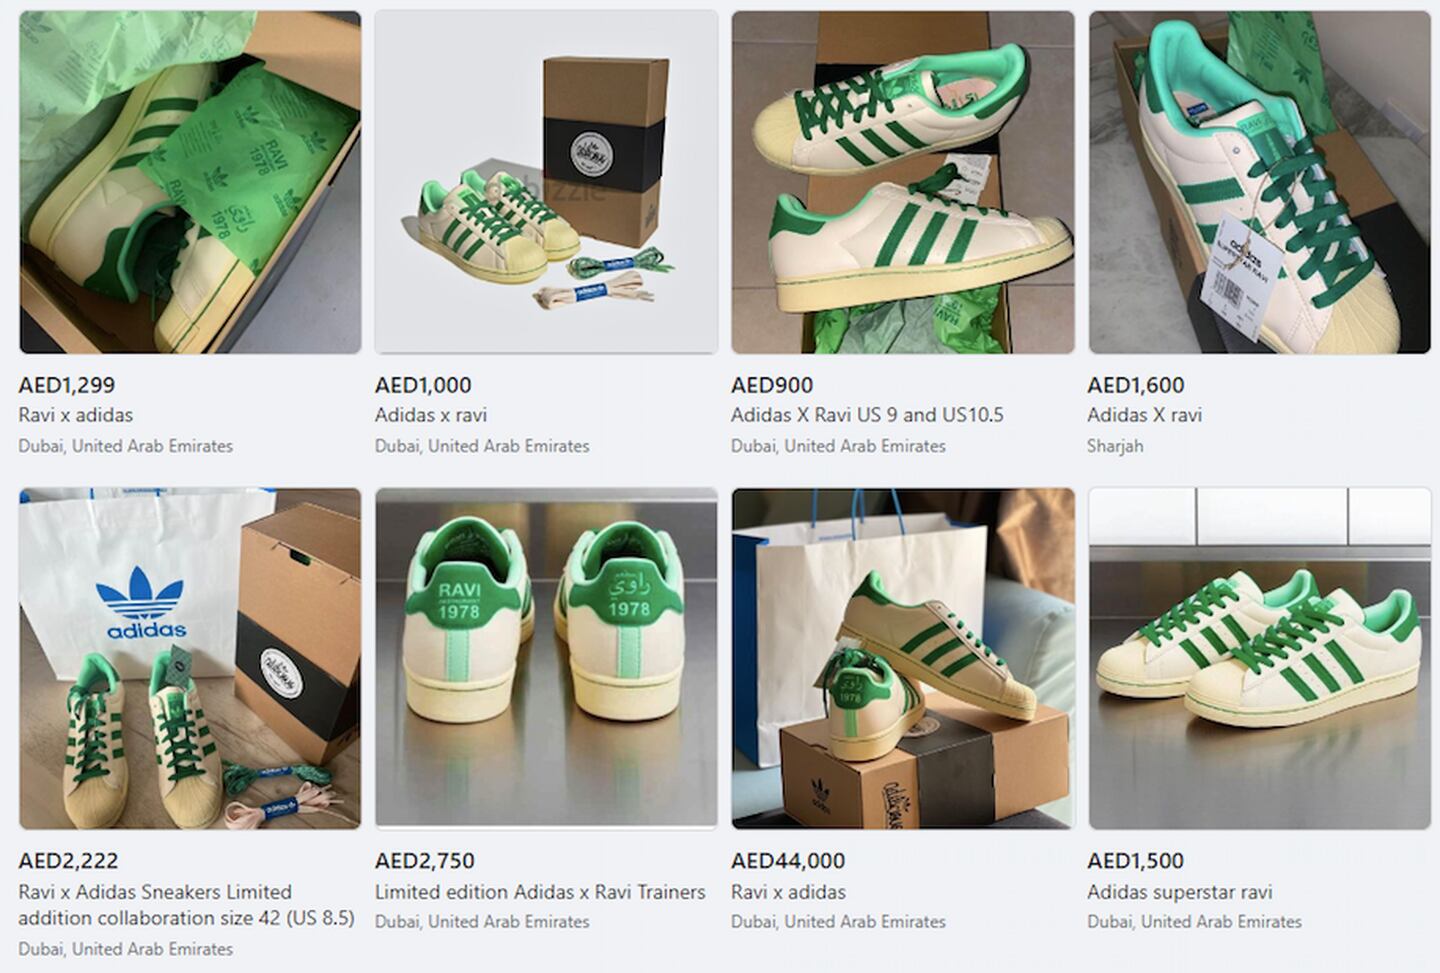 The adidas x Ravi Restaurant shoes are being listed on resale sites, including Facebook Marketplace and Dubizzle, for up to Dh44,000. Photo: Facebook